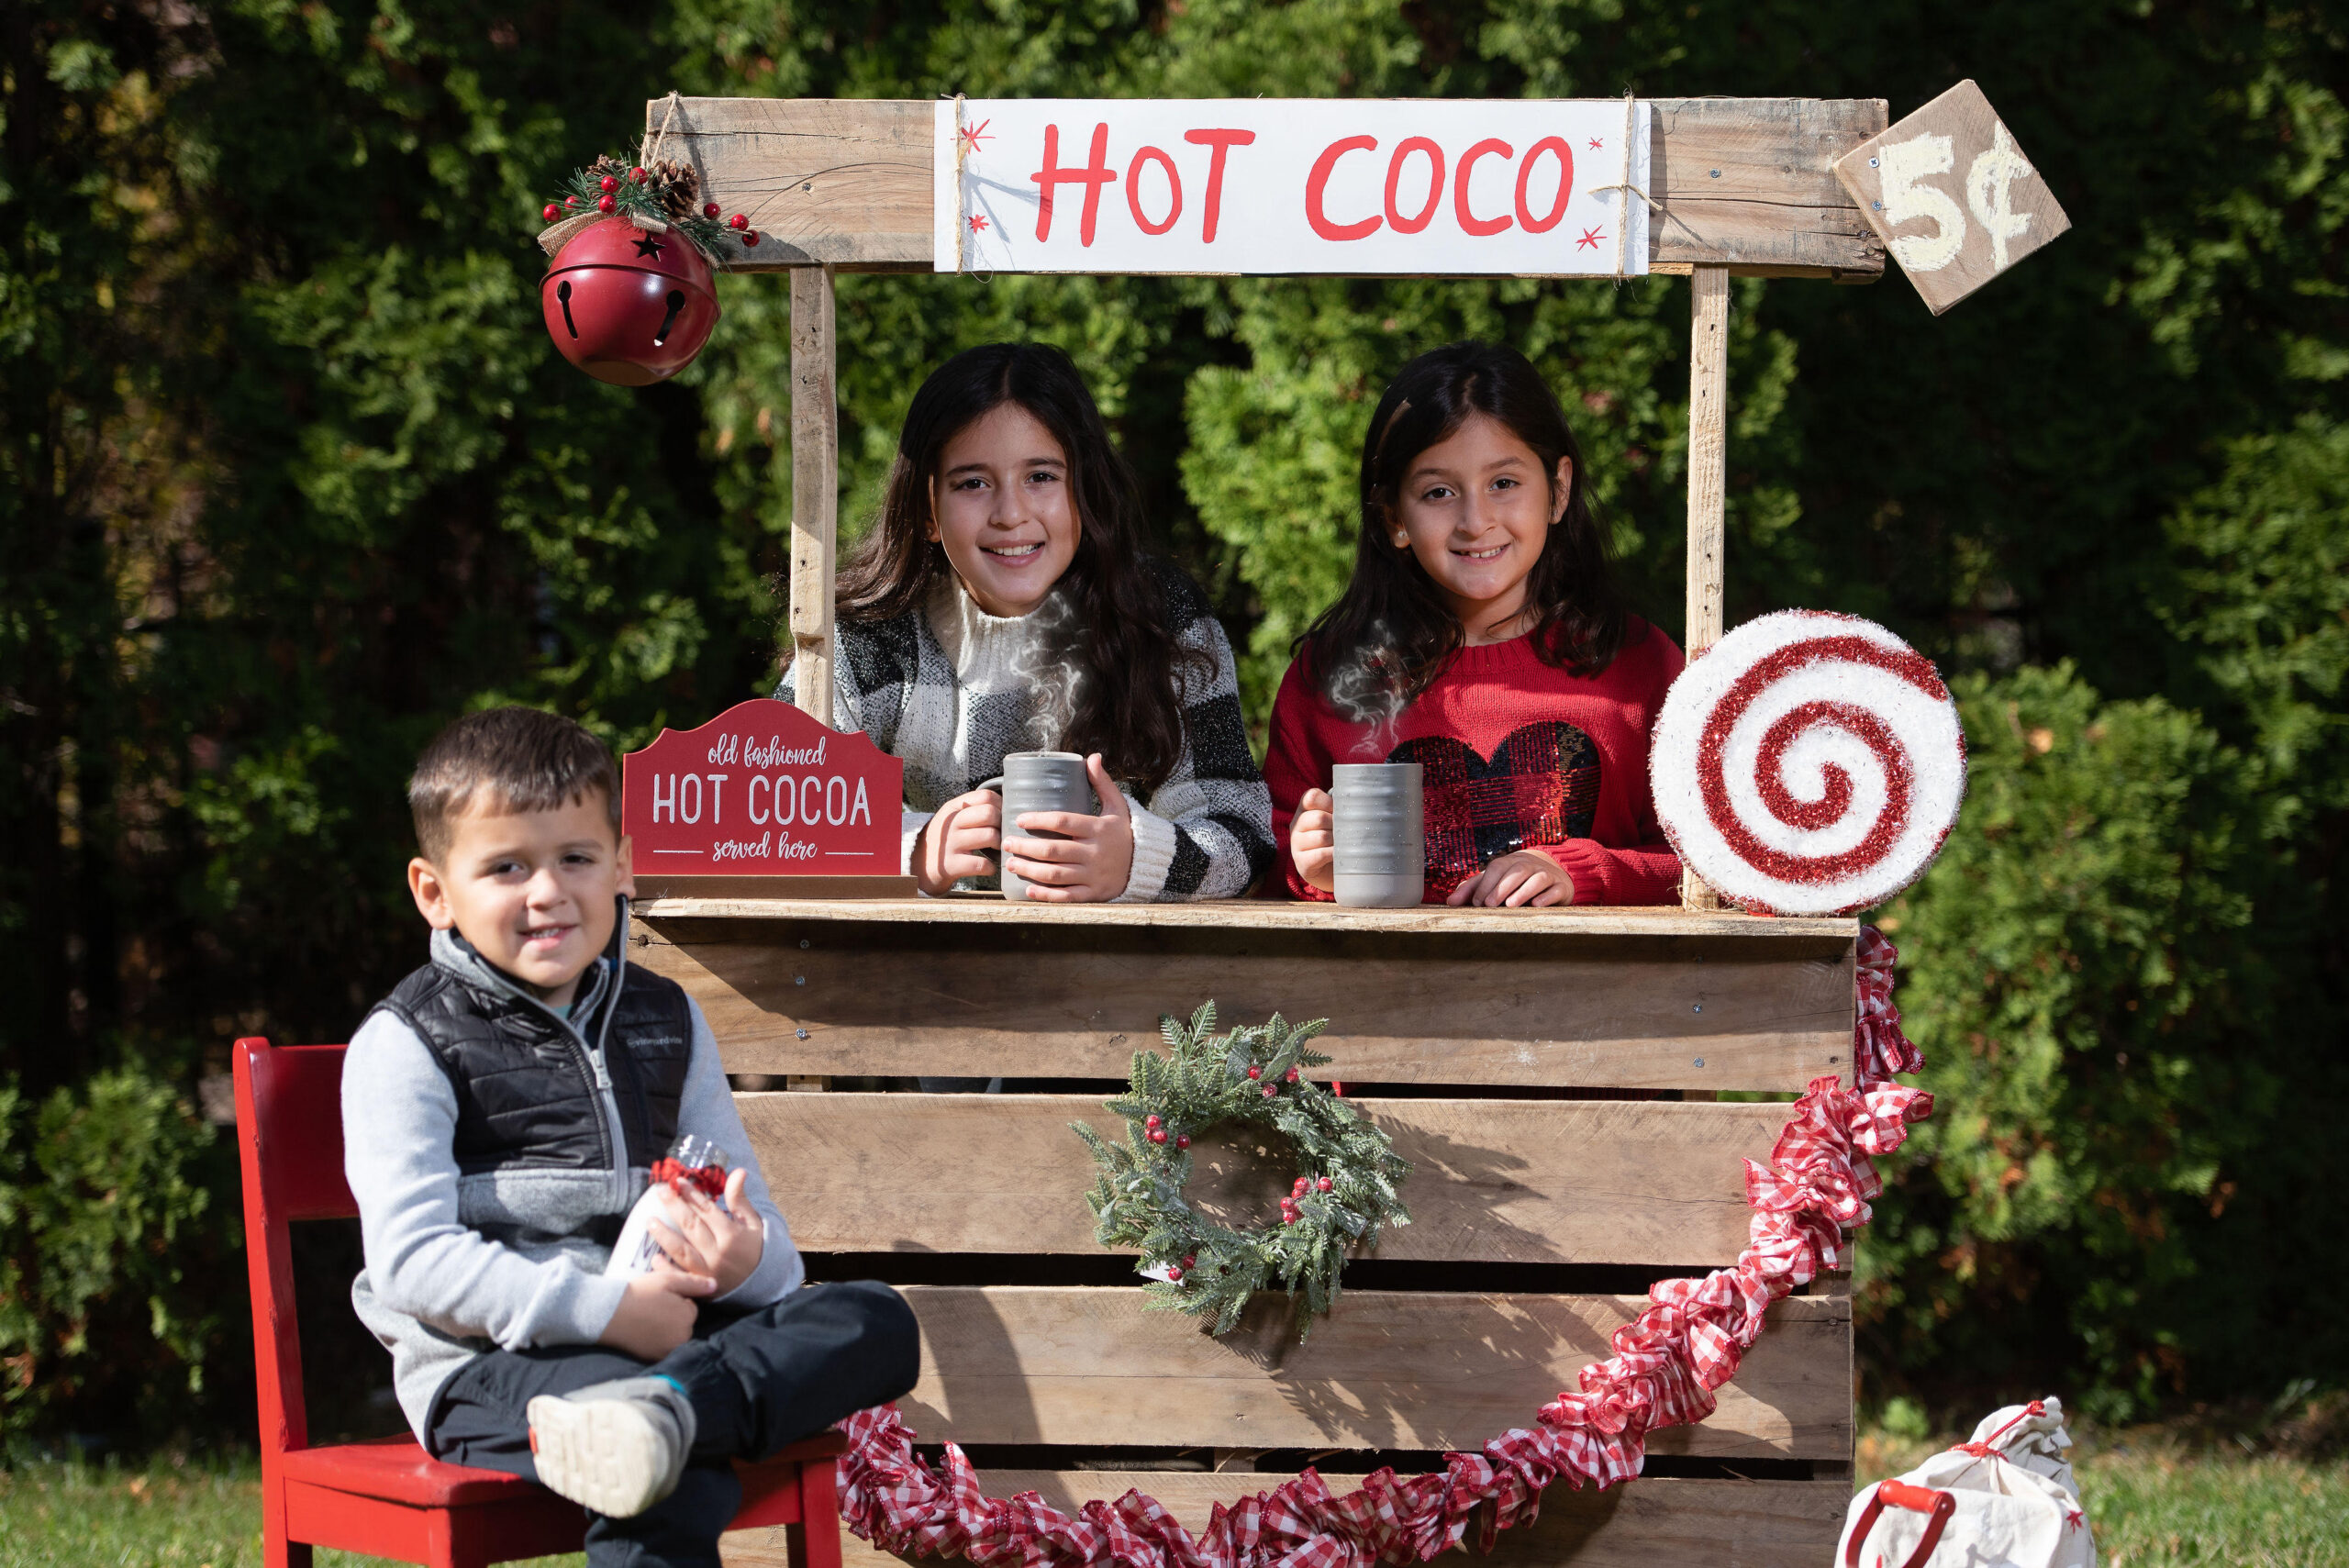 Kids at holiday hot coco stand